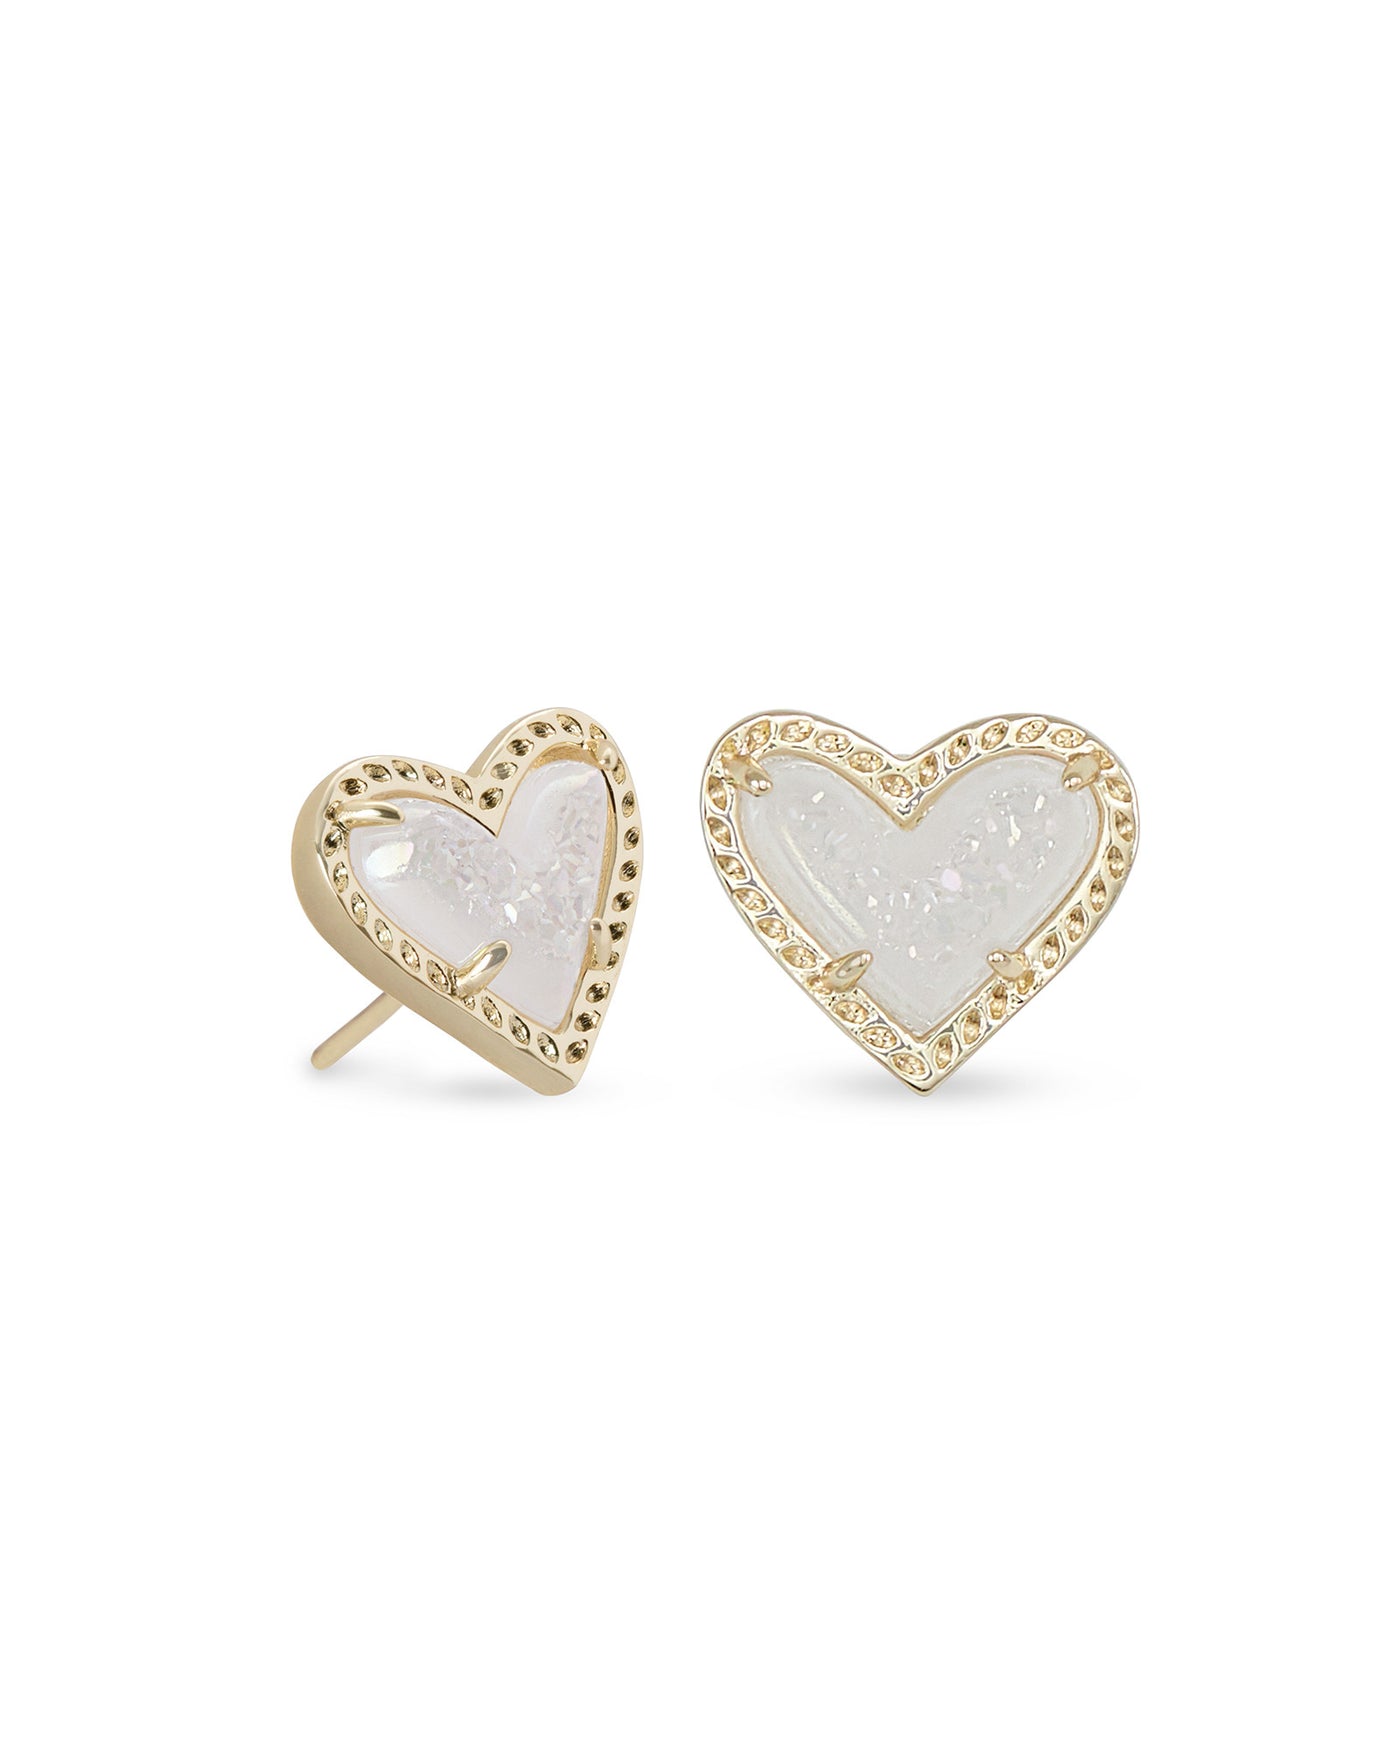 Ari Heart Stud Earrings Gold Iridescent Drusy on white background, front view.